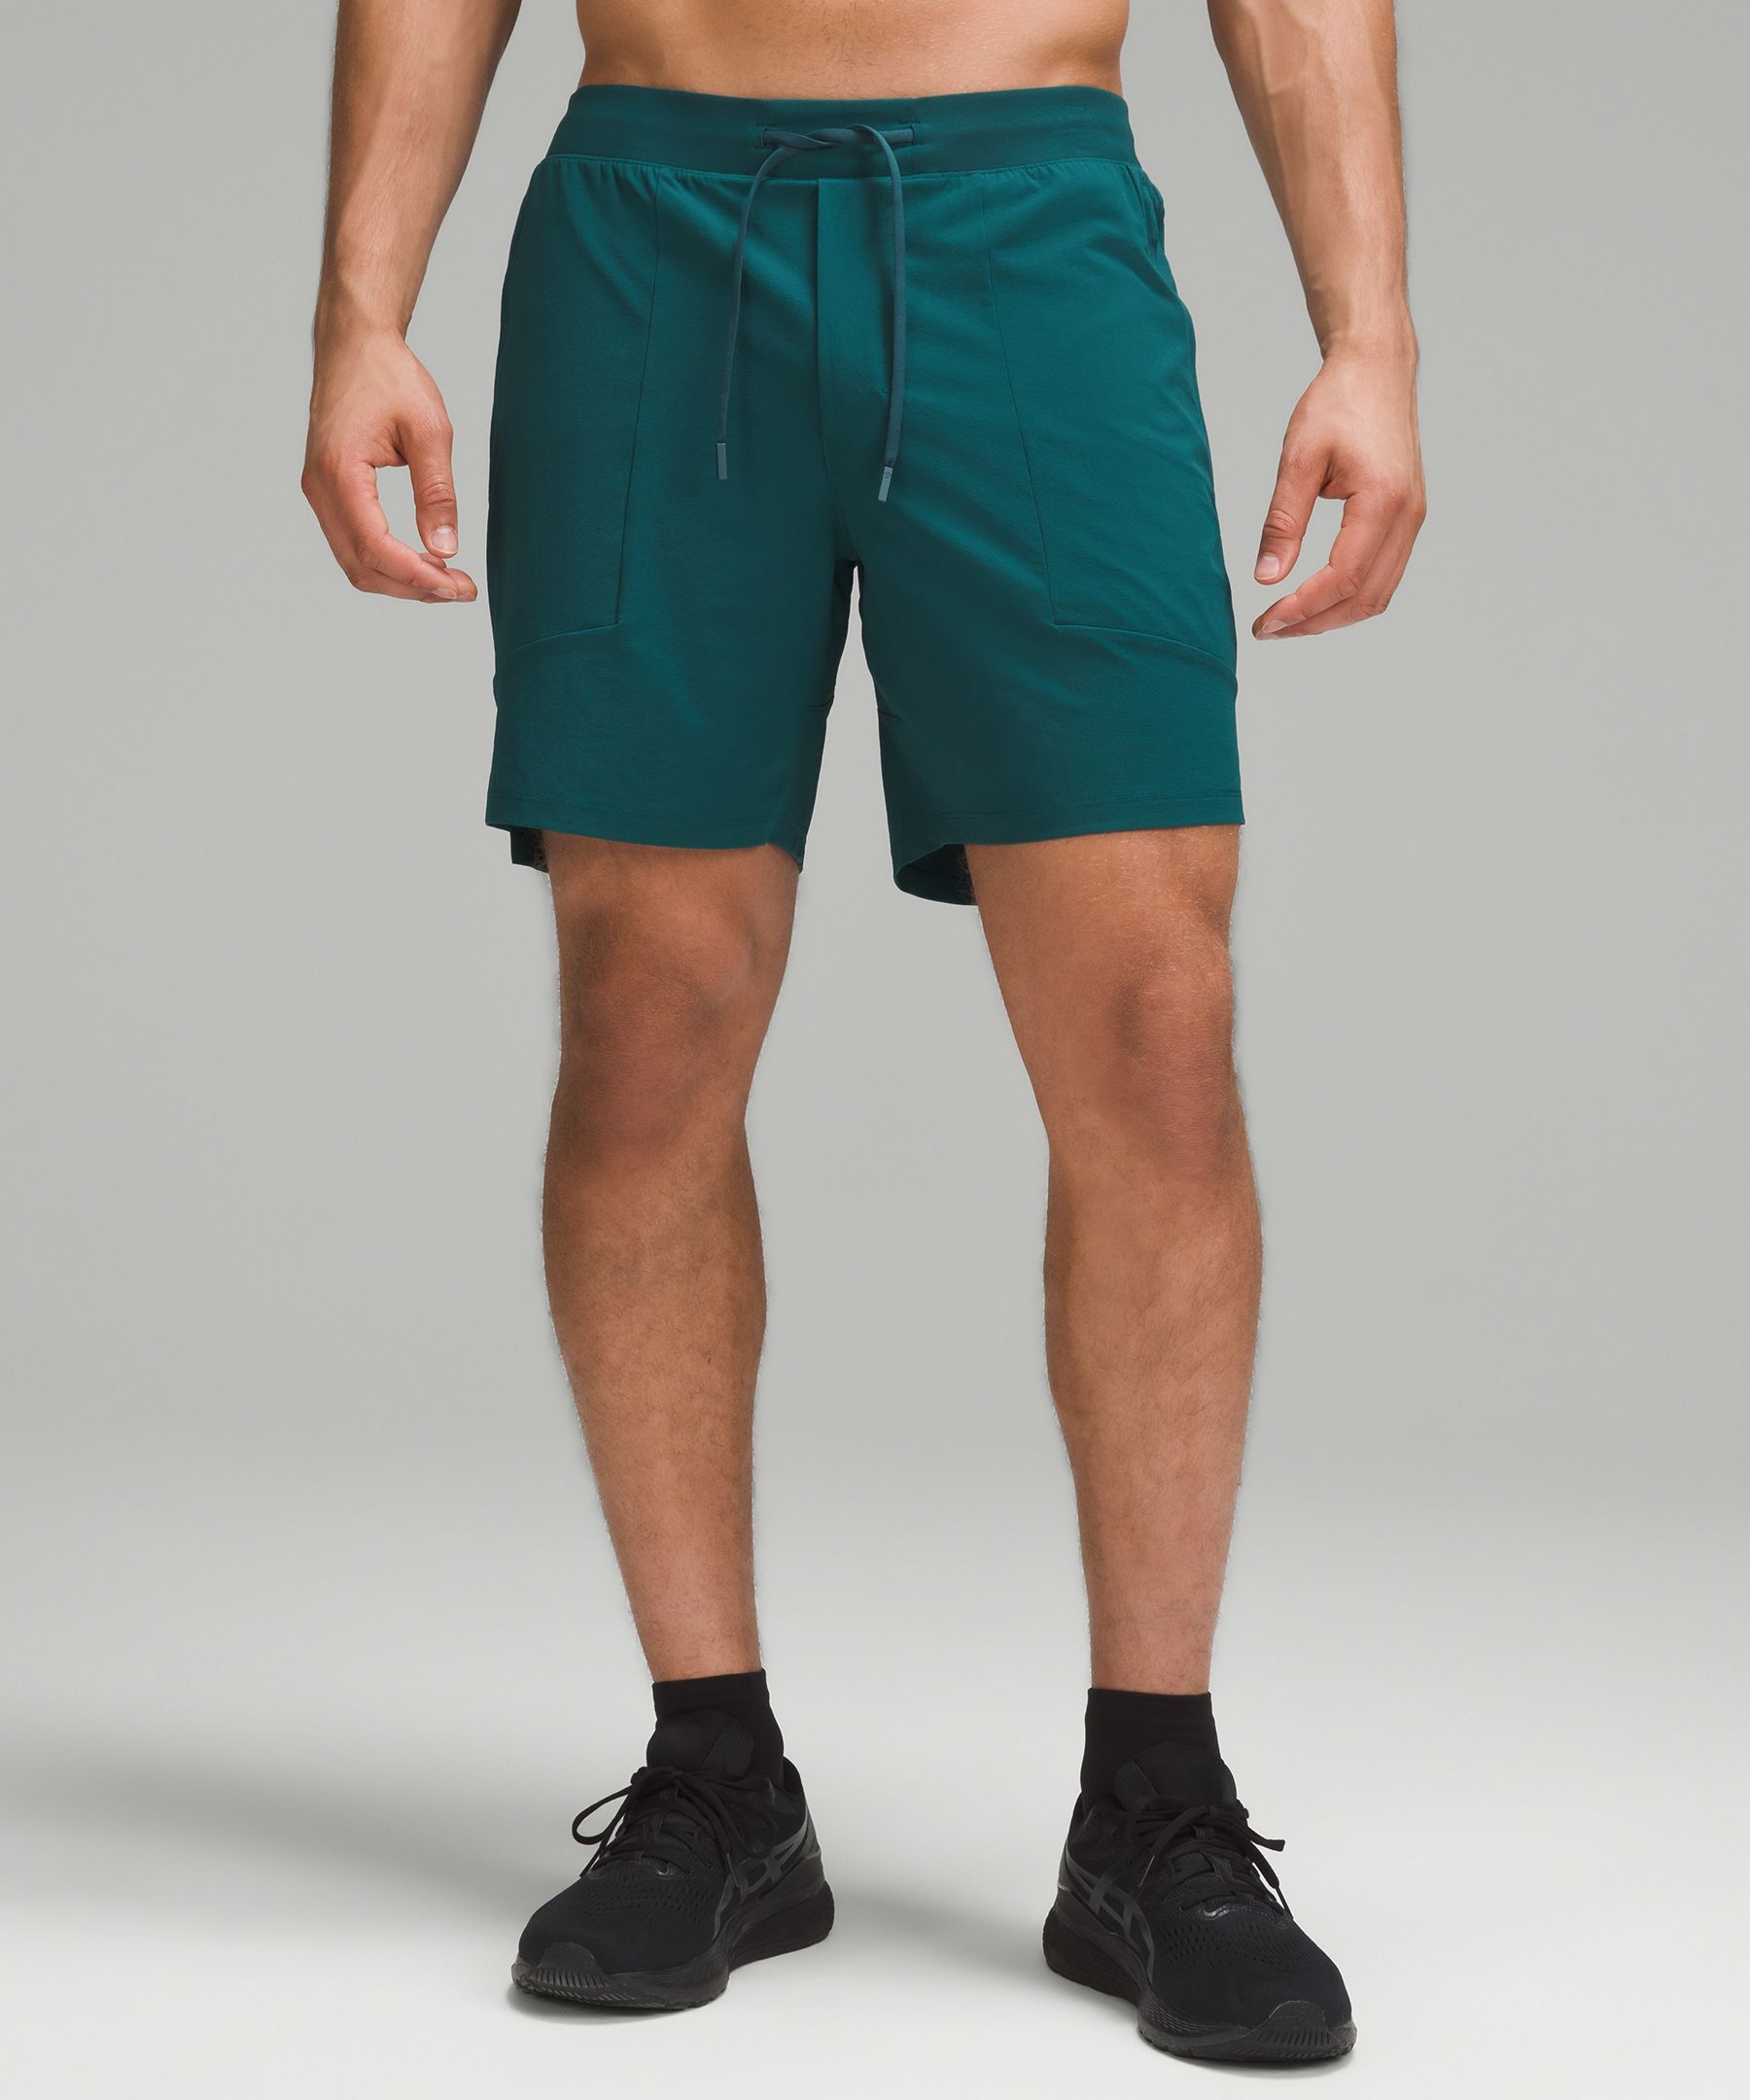 lululemon athletica License To Train Linerless Shorts - 5 - Color  Green/neon - Size 2xl for Men